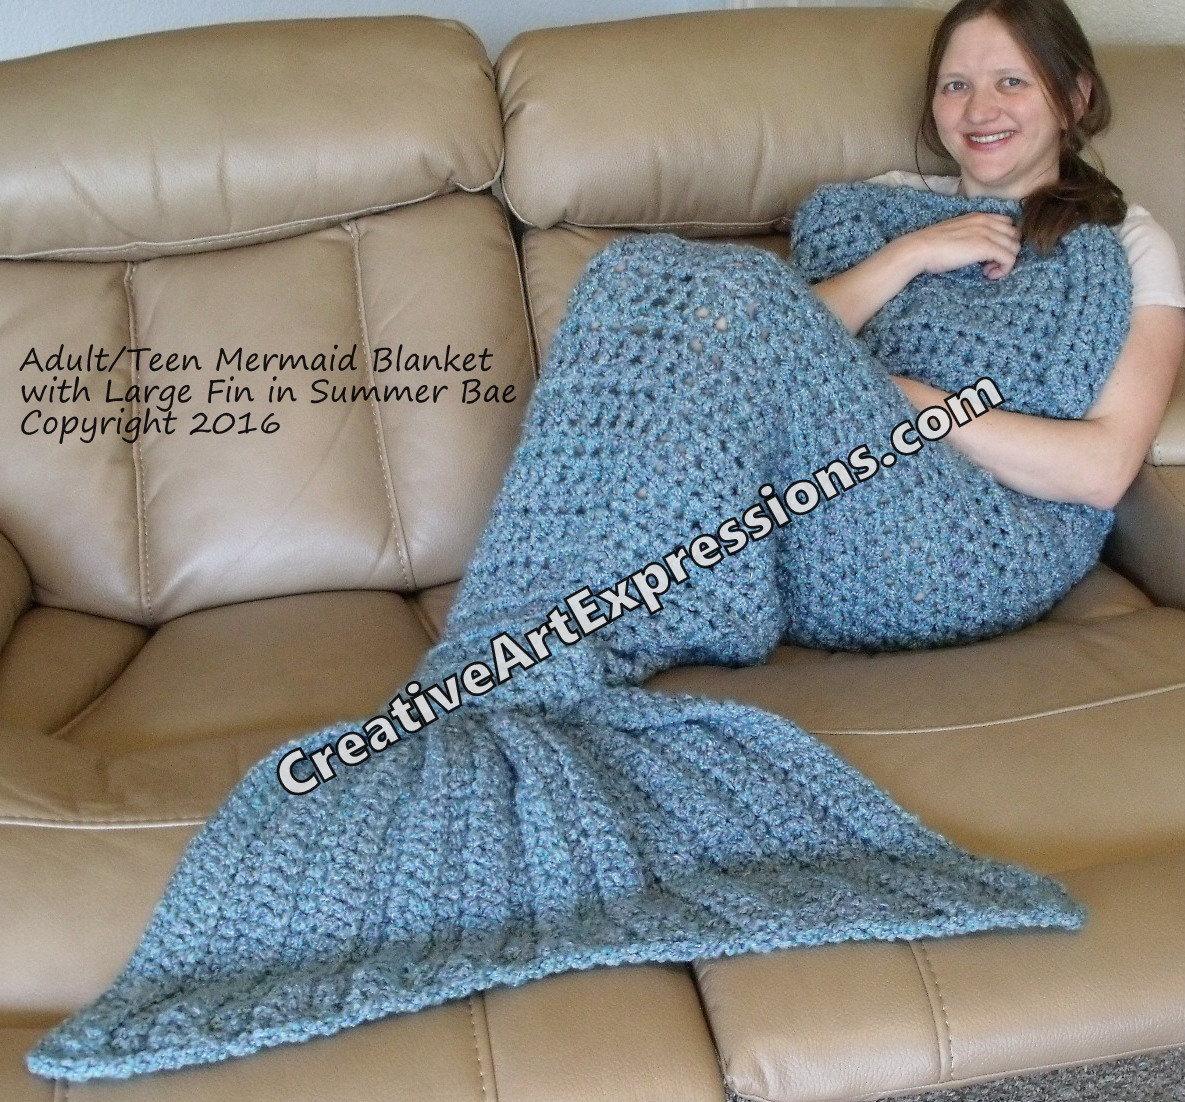 Mermaid Blanket Adult/Teen with Large Fin in Summer Bay